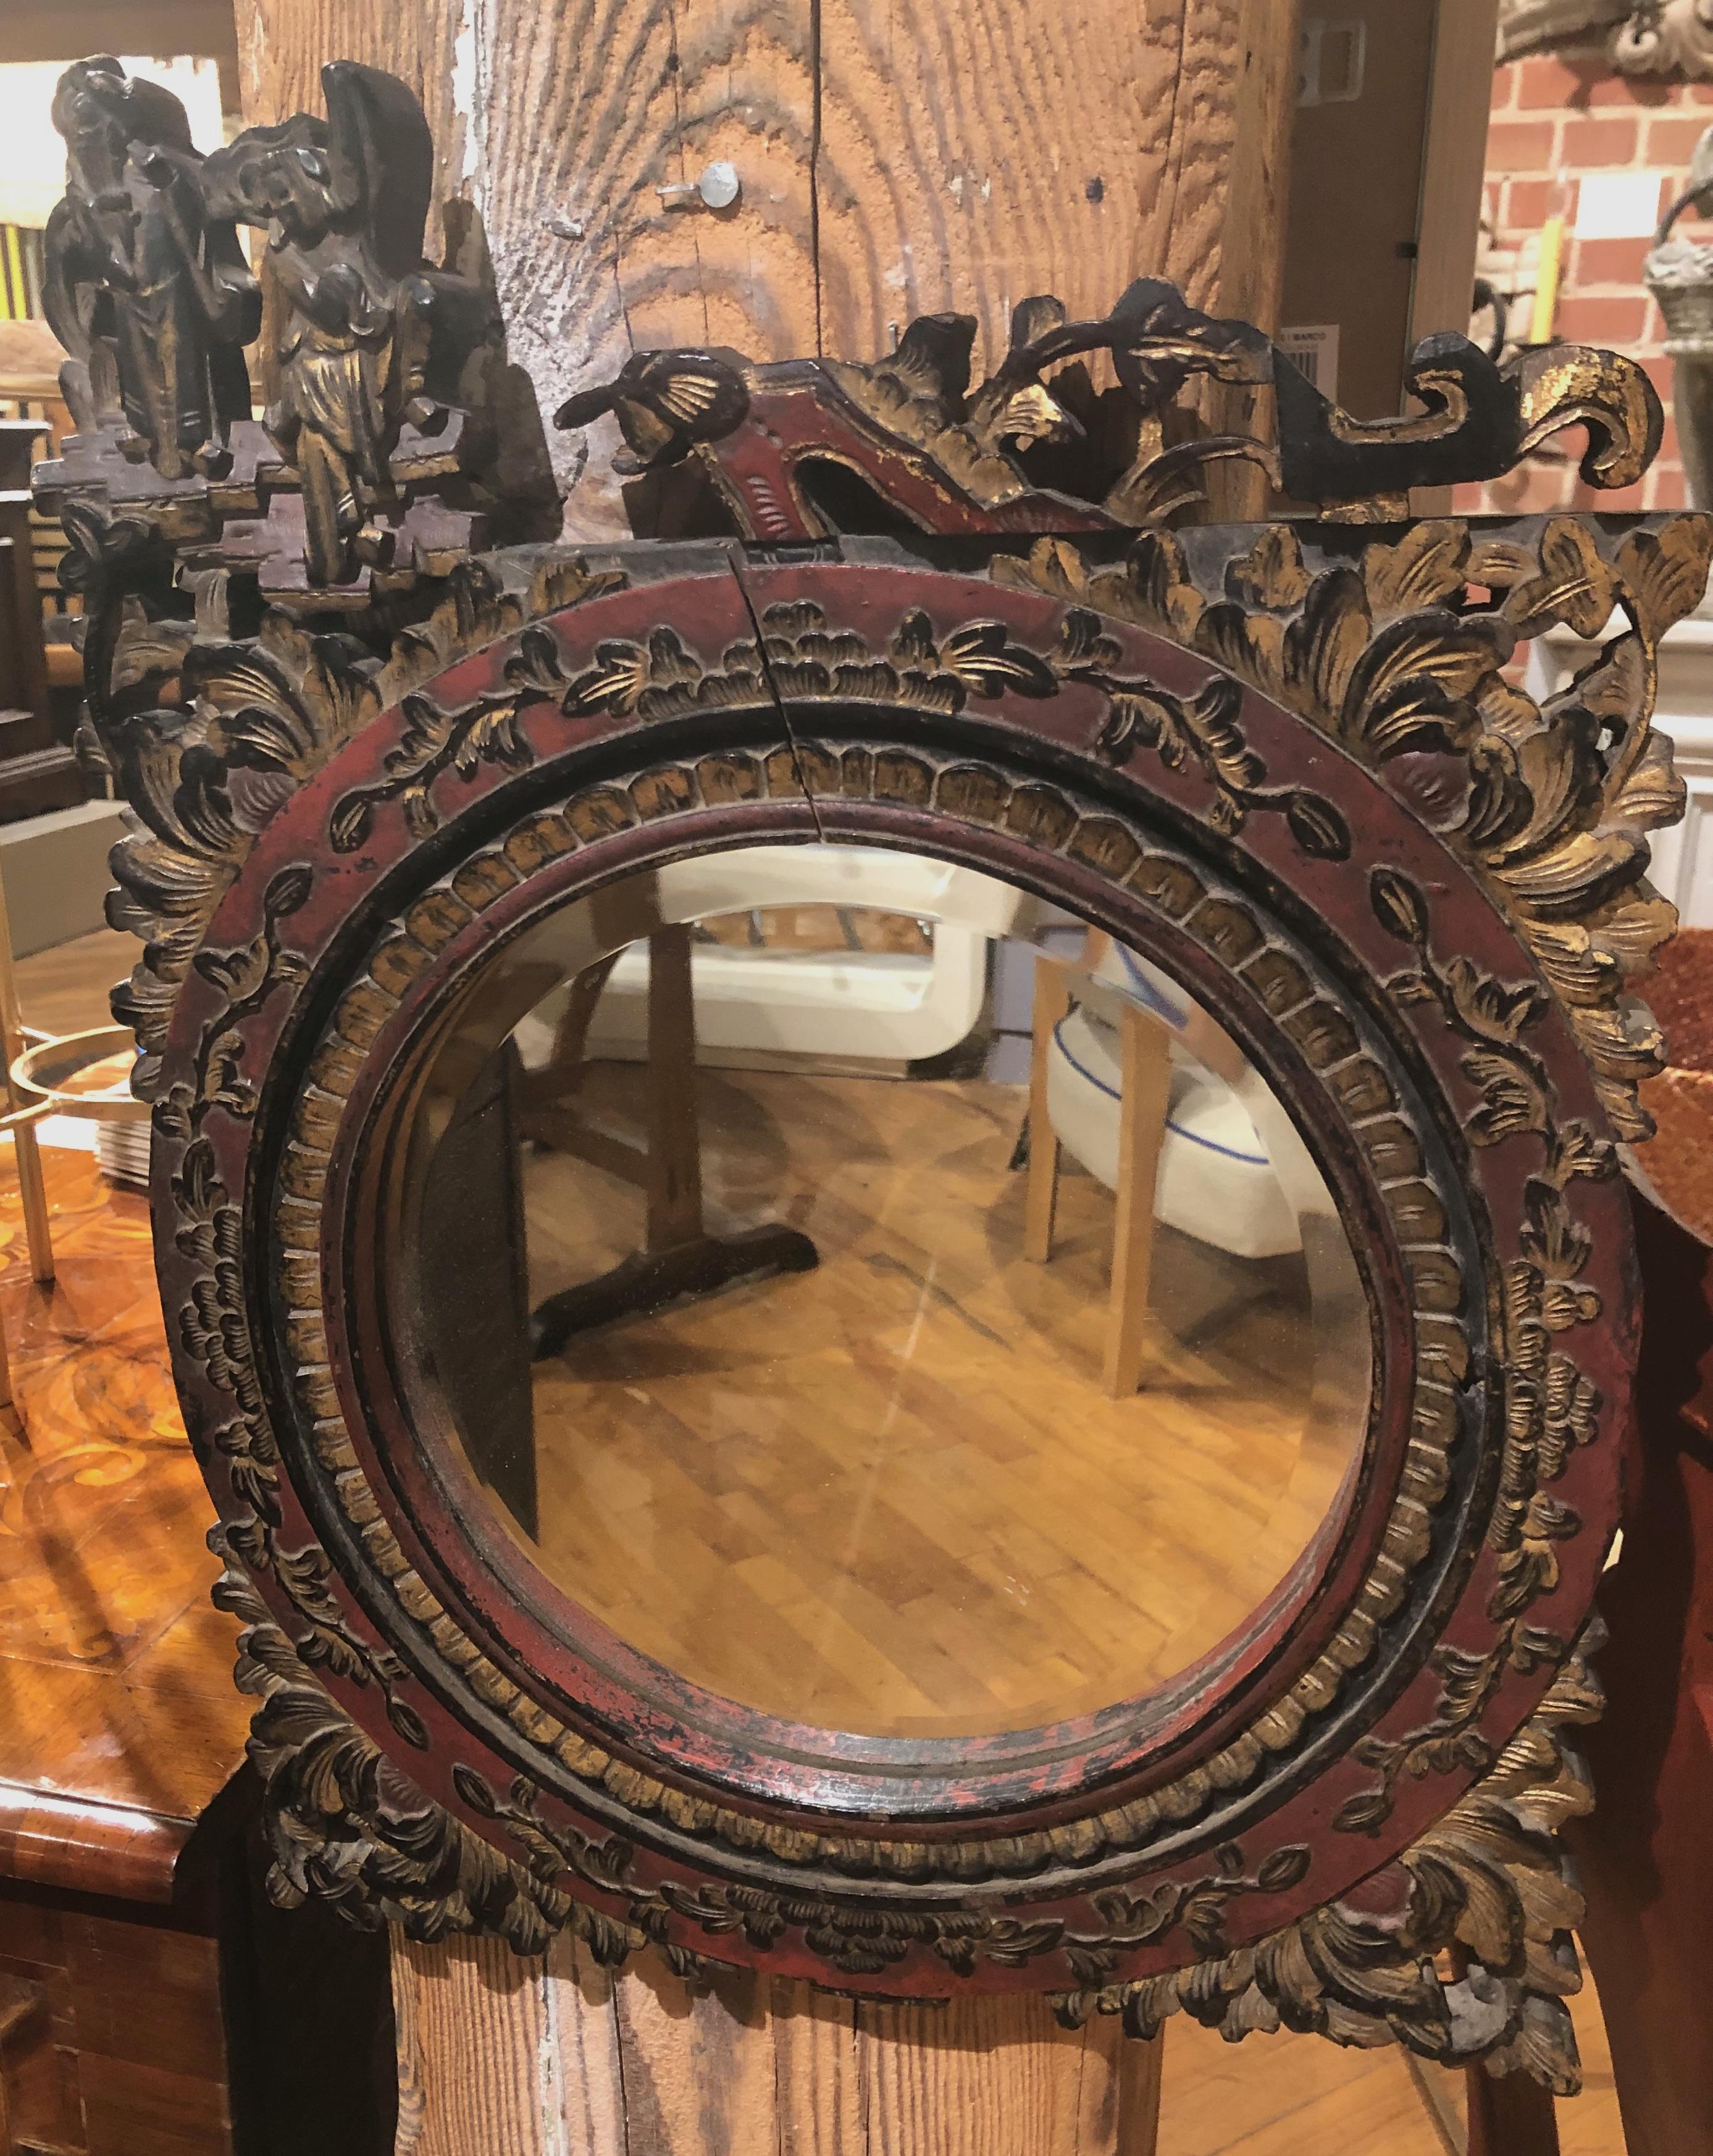 Small pair of late 19th century intricately carved Chinese mirrors with gilded black and red lacquered finish. Lovely for small rooms or hallways.
China, 1890.
Measure: 20” H 15” W.